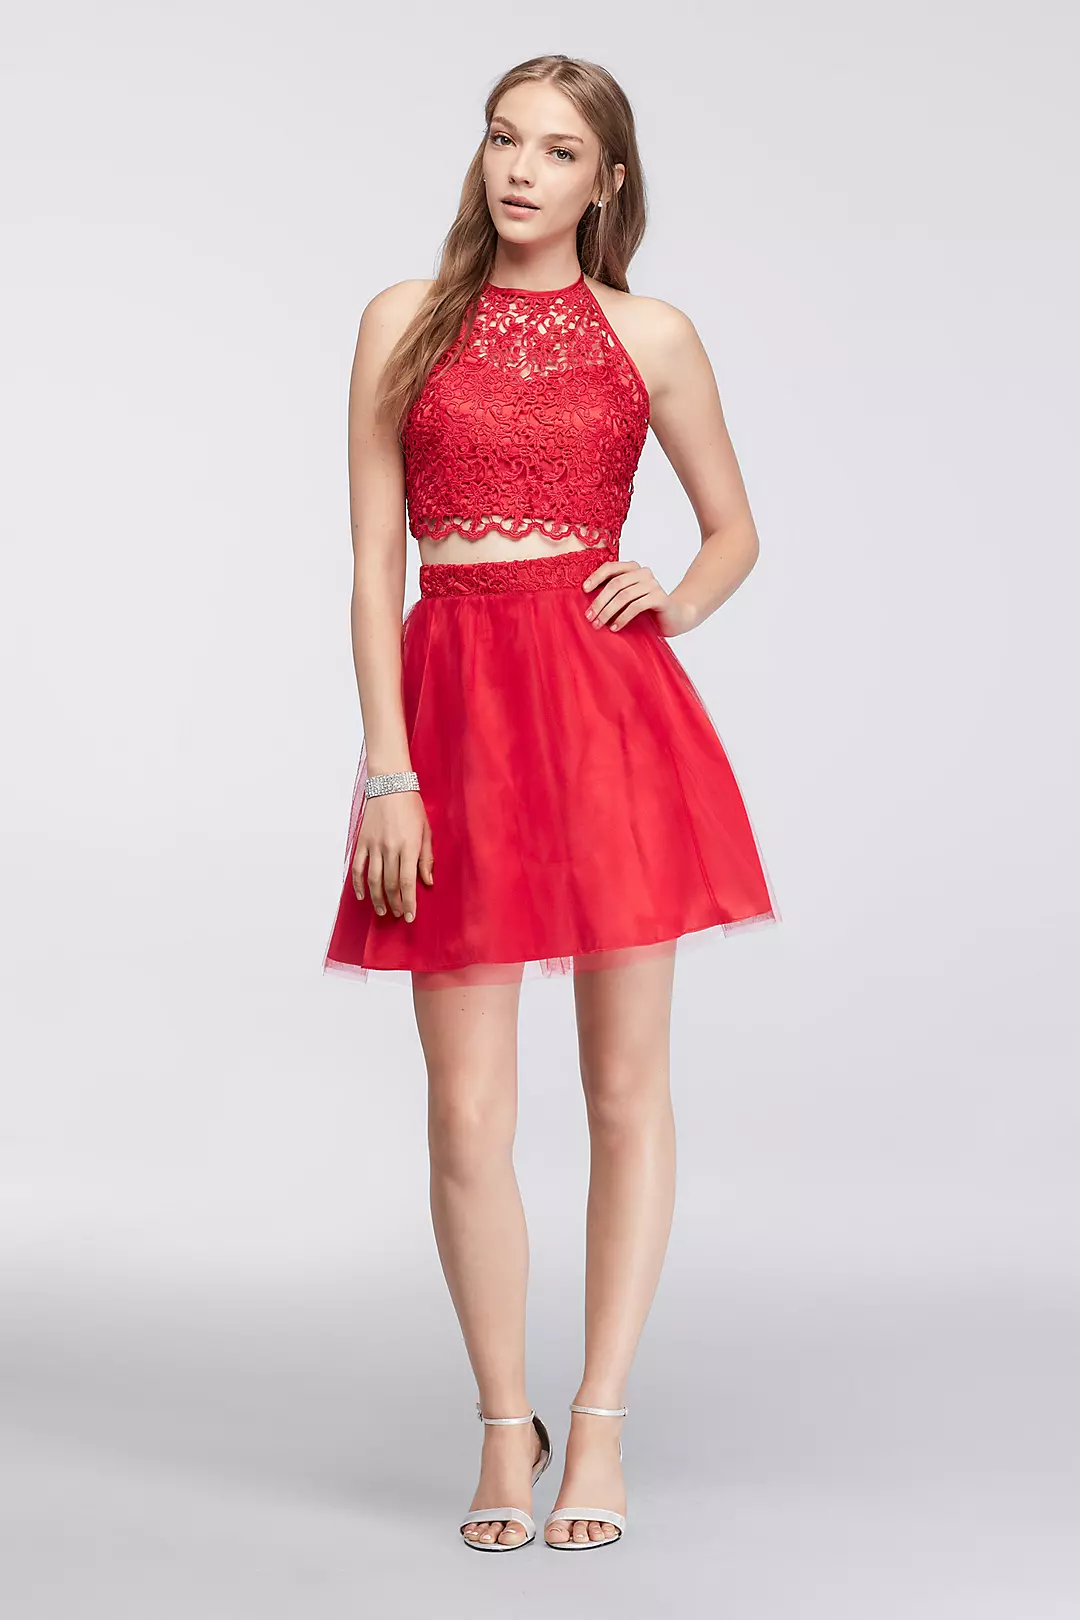 Homecoming Crop Top with Tulle Skirt Image